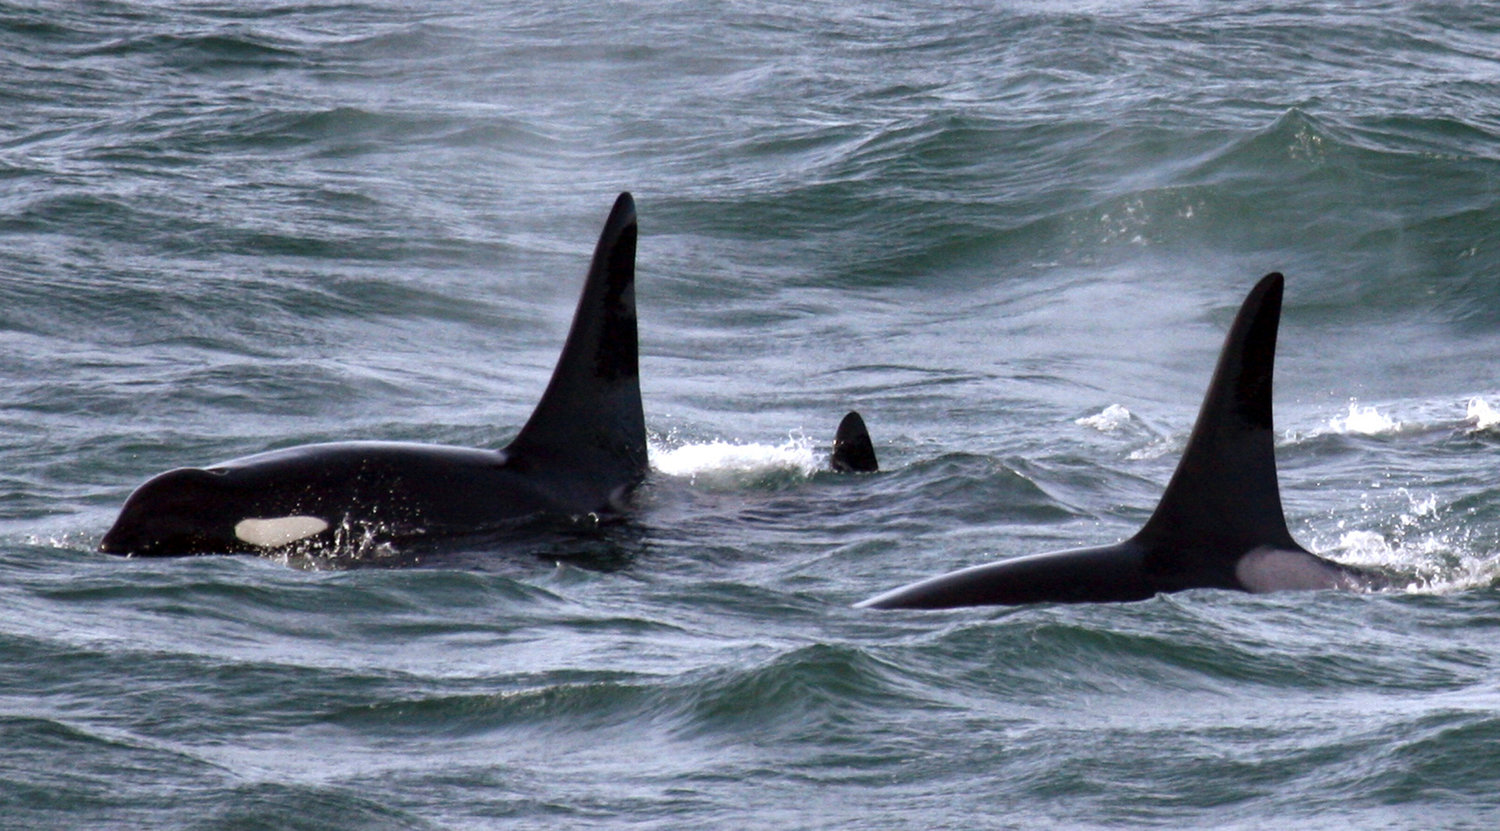 In this Feb. 27, 2016, photo provided by NOAA Northwest Fisheries Science Center, an orca whale known as L95, right, swims with other whales from the L and K pods in the Pacific Ocean near the mouth of the Columbia River near Ilwaco, Wash., days after being fitted with a satellite tag. Federal biologists have temporarily stopped tagging endangered killer whales in Washington state’s Puget Sound after a dead orca was found with pieces of a dart tag lodged in its dorsal fin.   (NOAA Northwest Fisheries Science Center via AP)